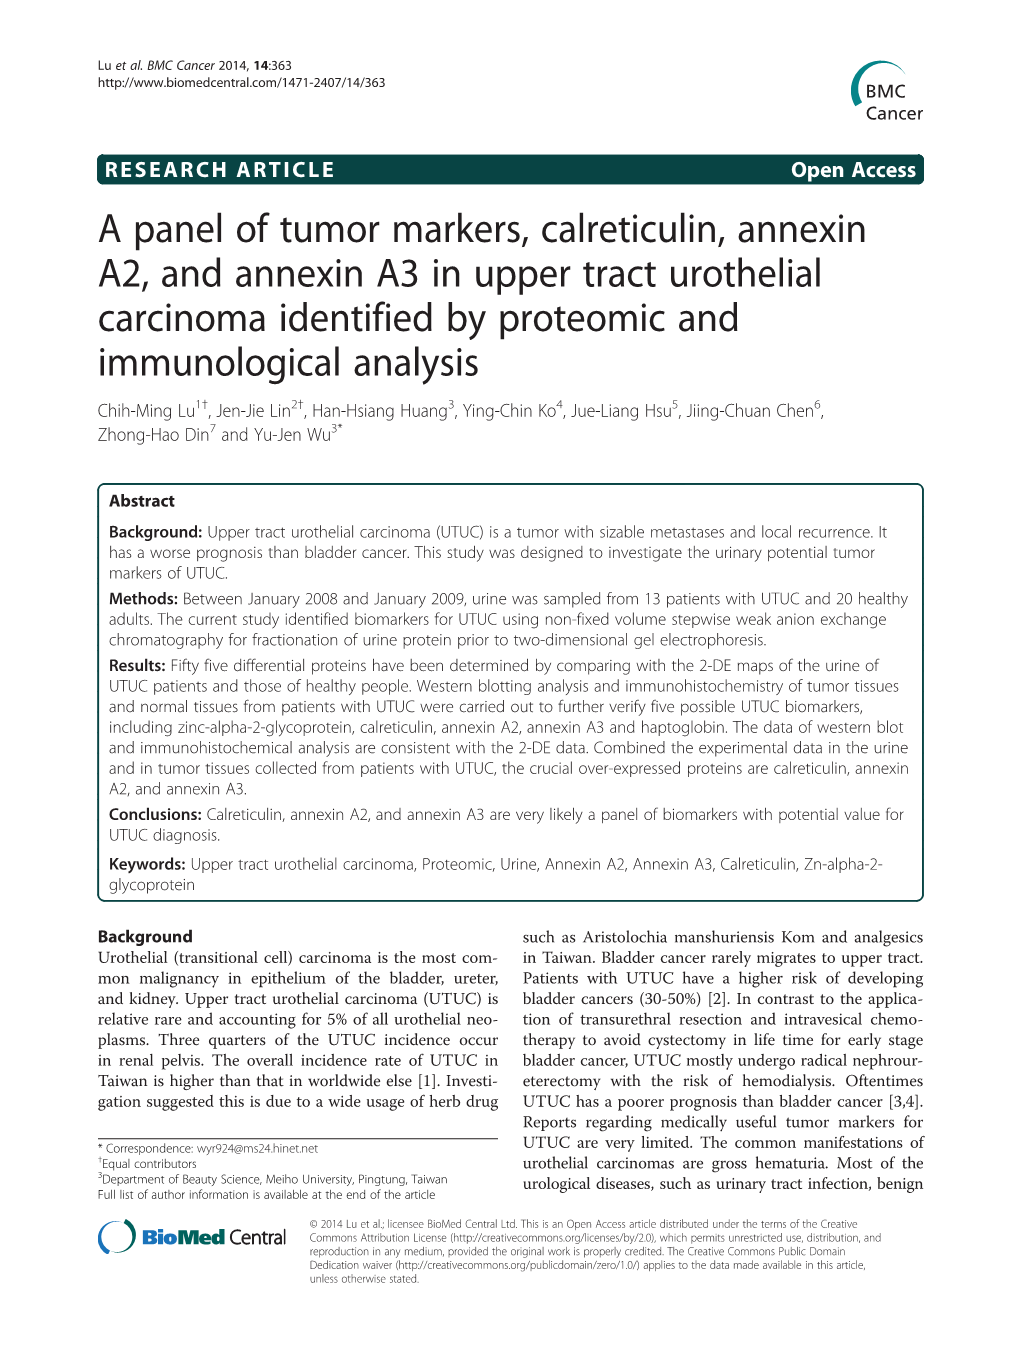 A Panel of Tumor Markers, Calreticulin, Annexin A2, and Annexin A3 In